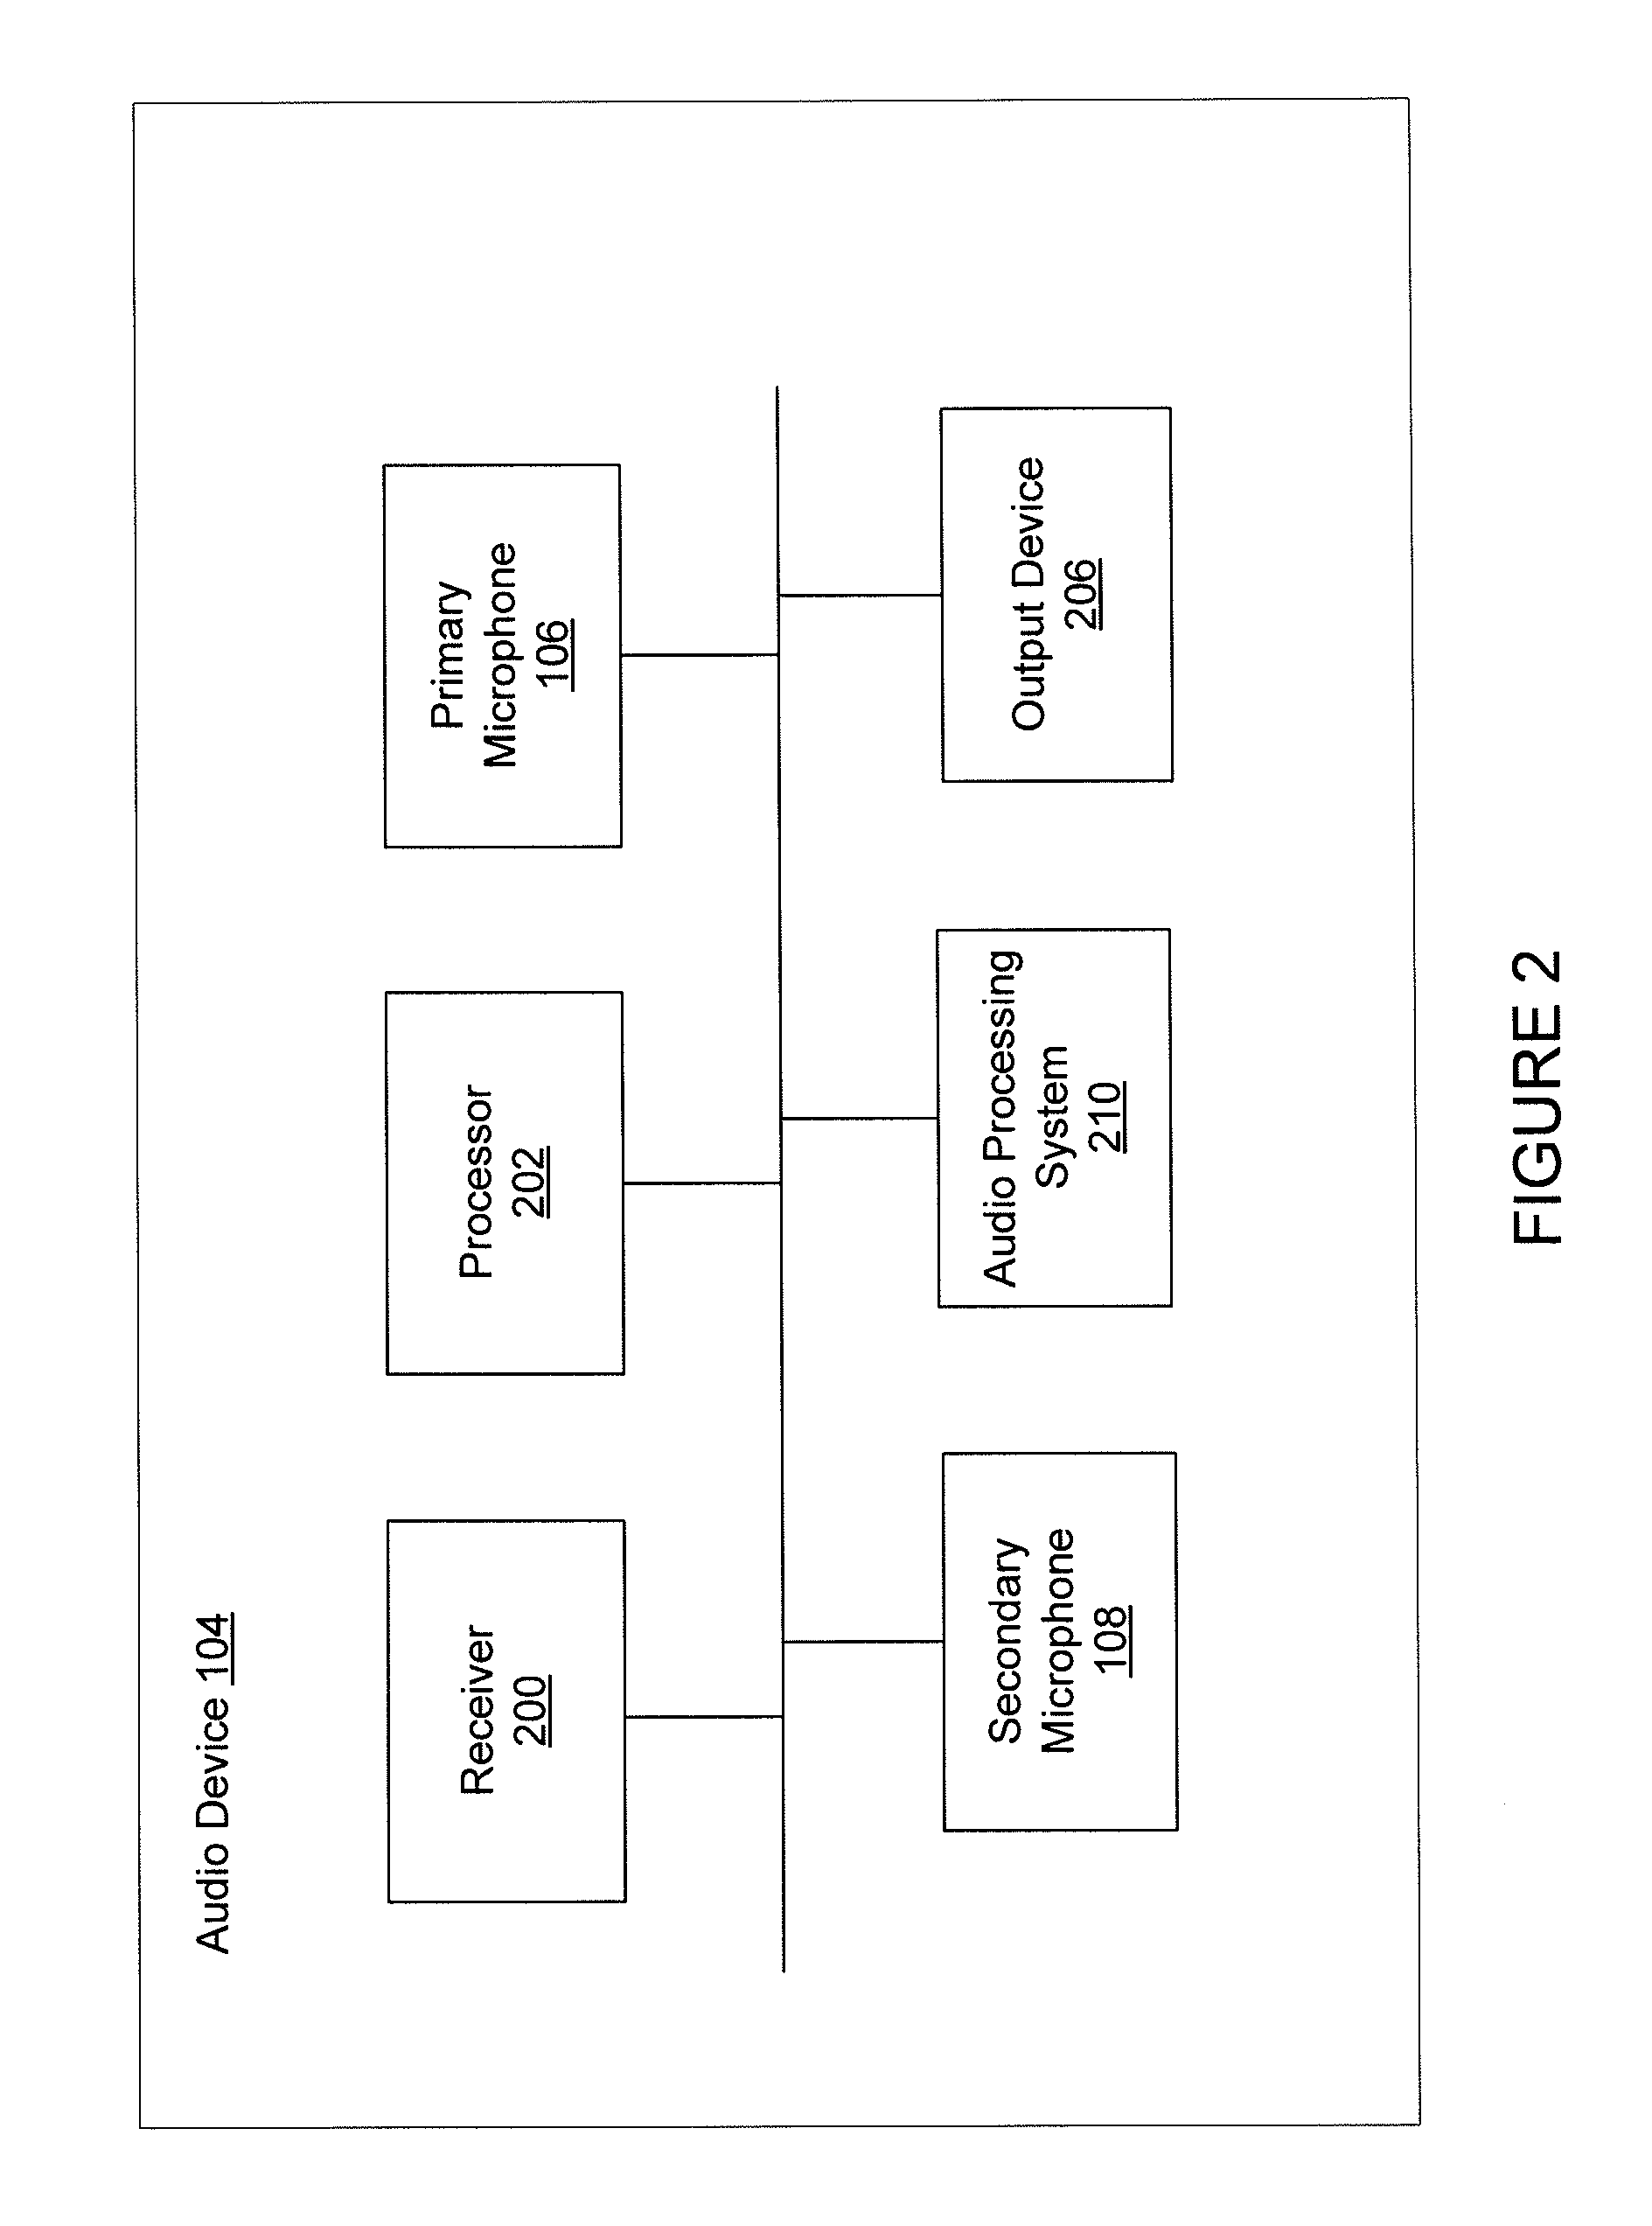 Wind noise detection and suppression